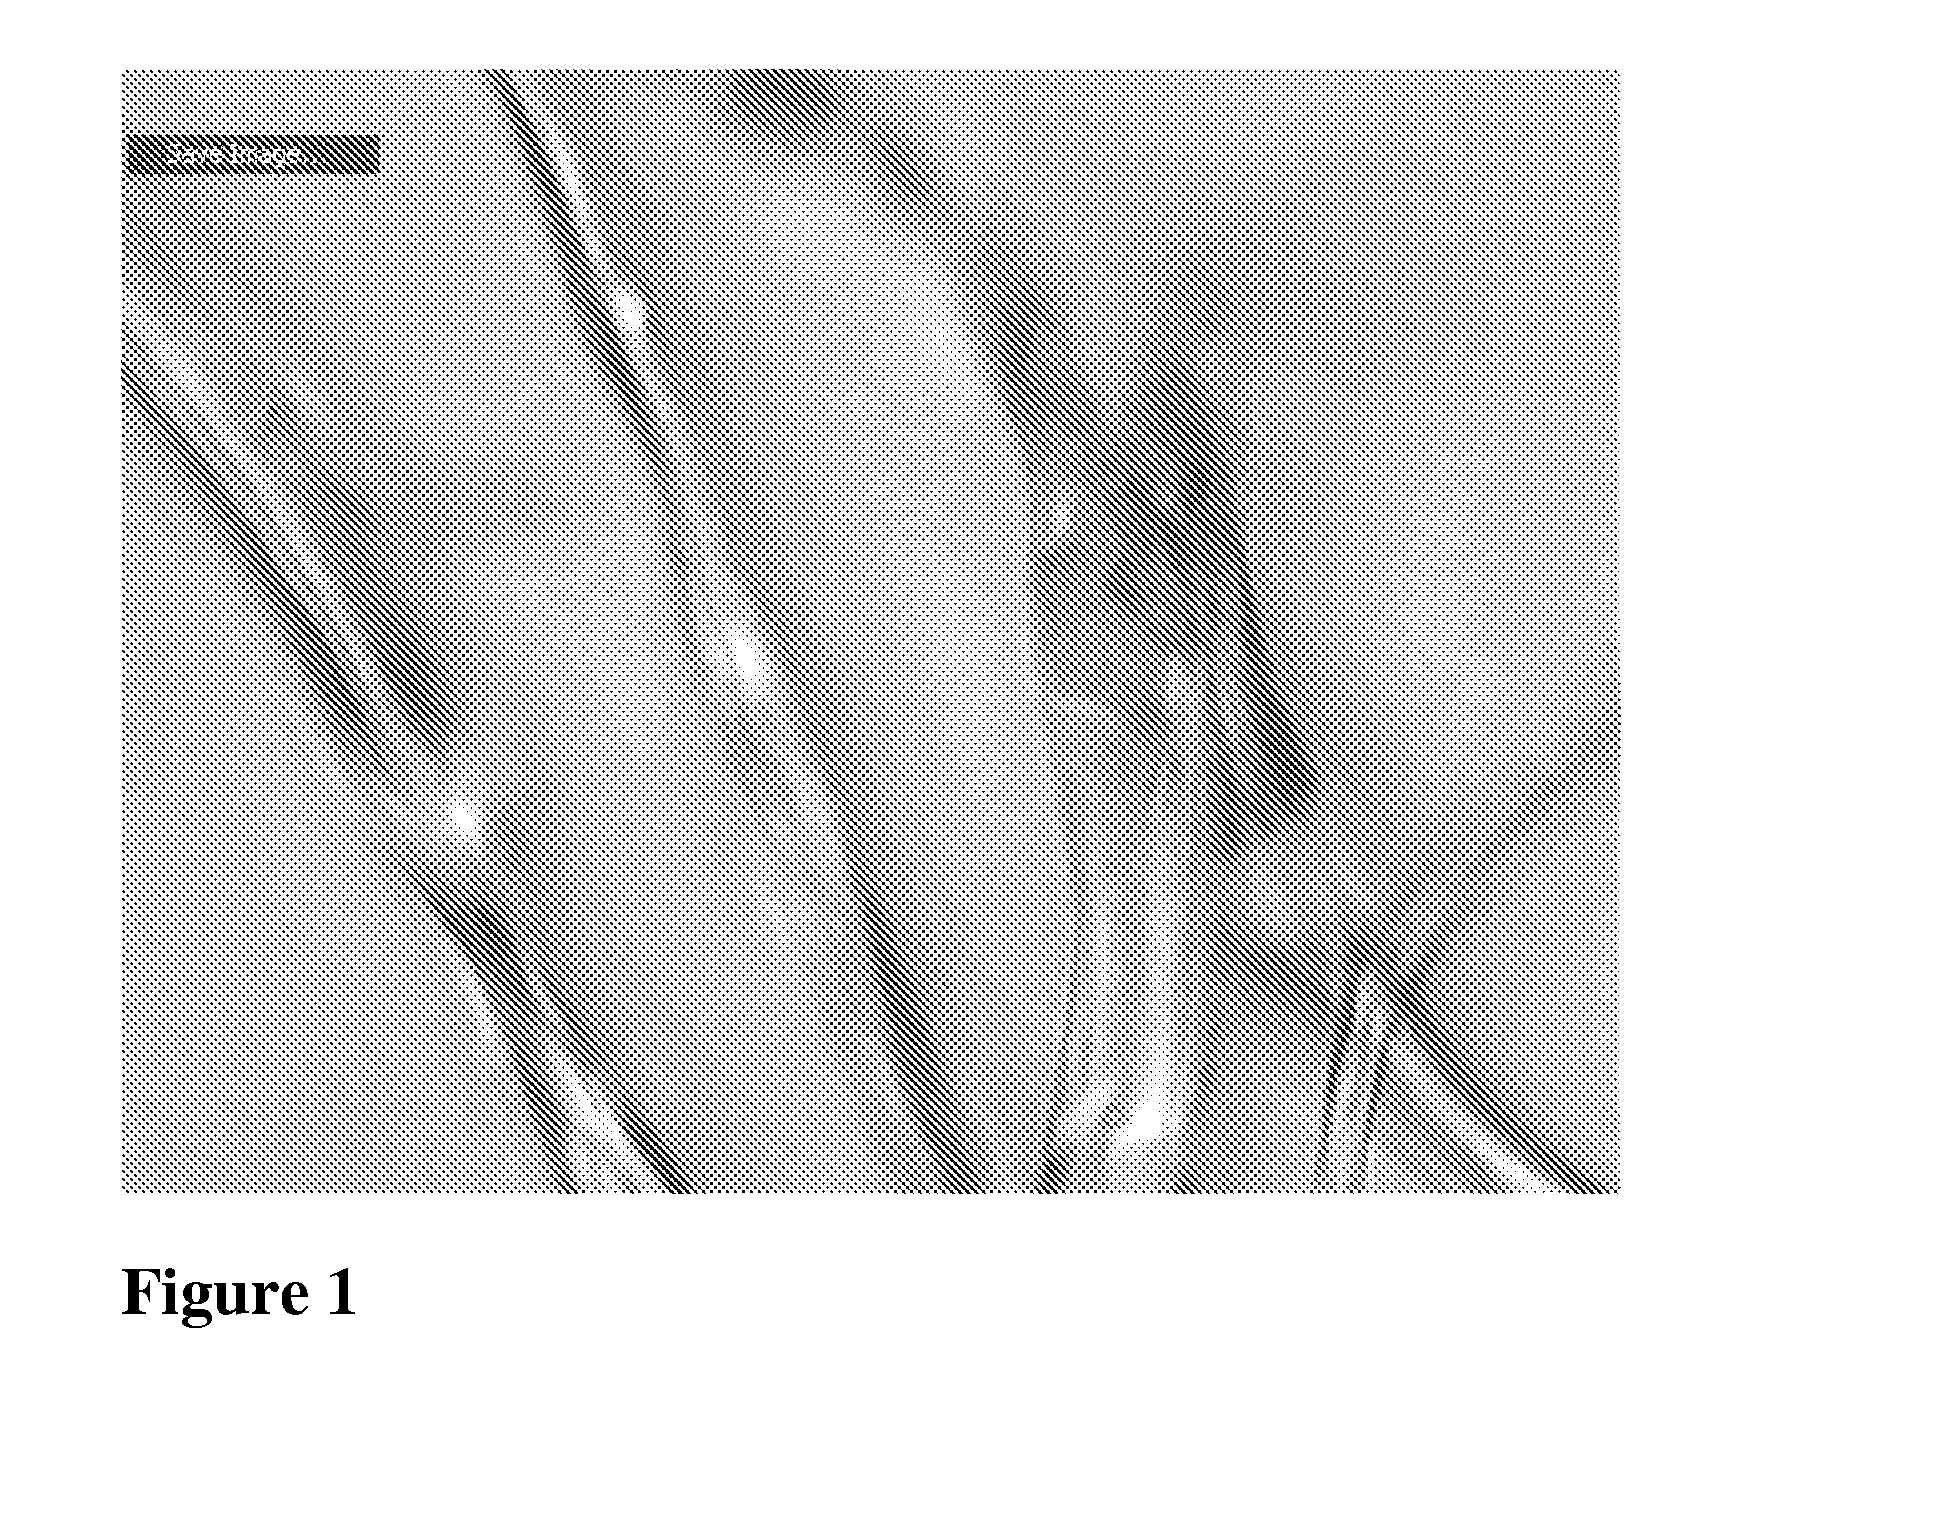 Fibers Including Nanoparticles And A Method Of Producing The Nanoparticles